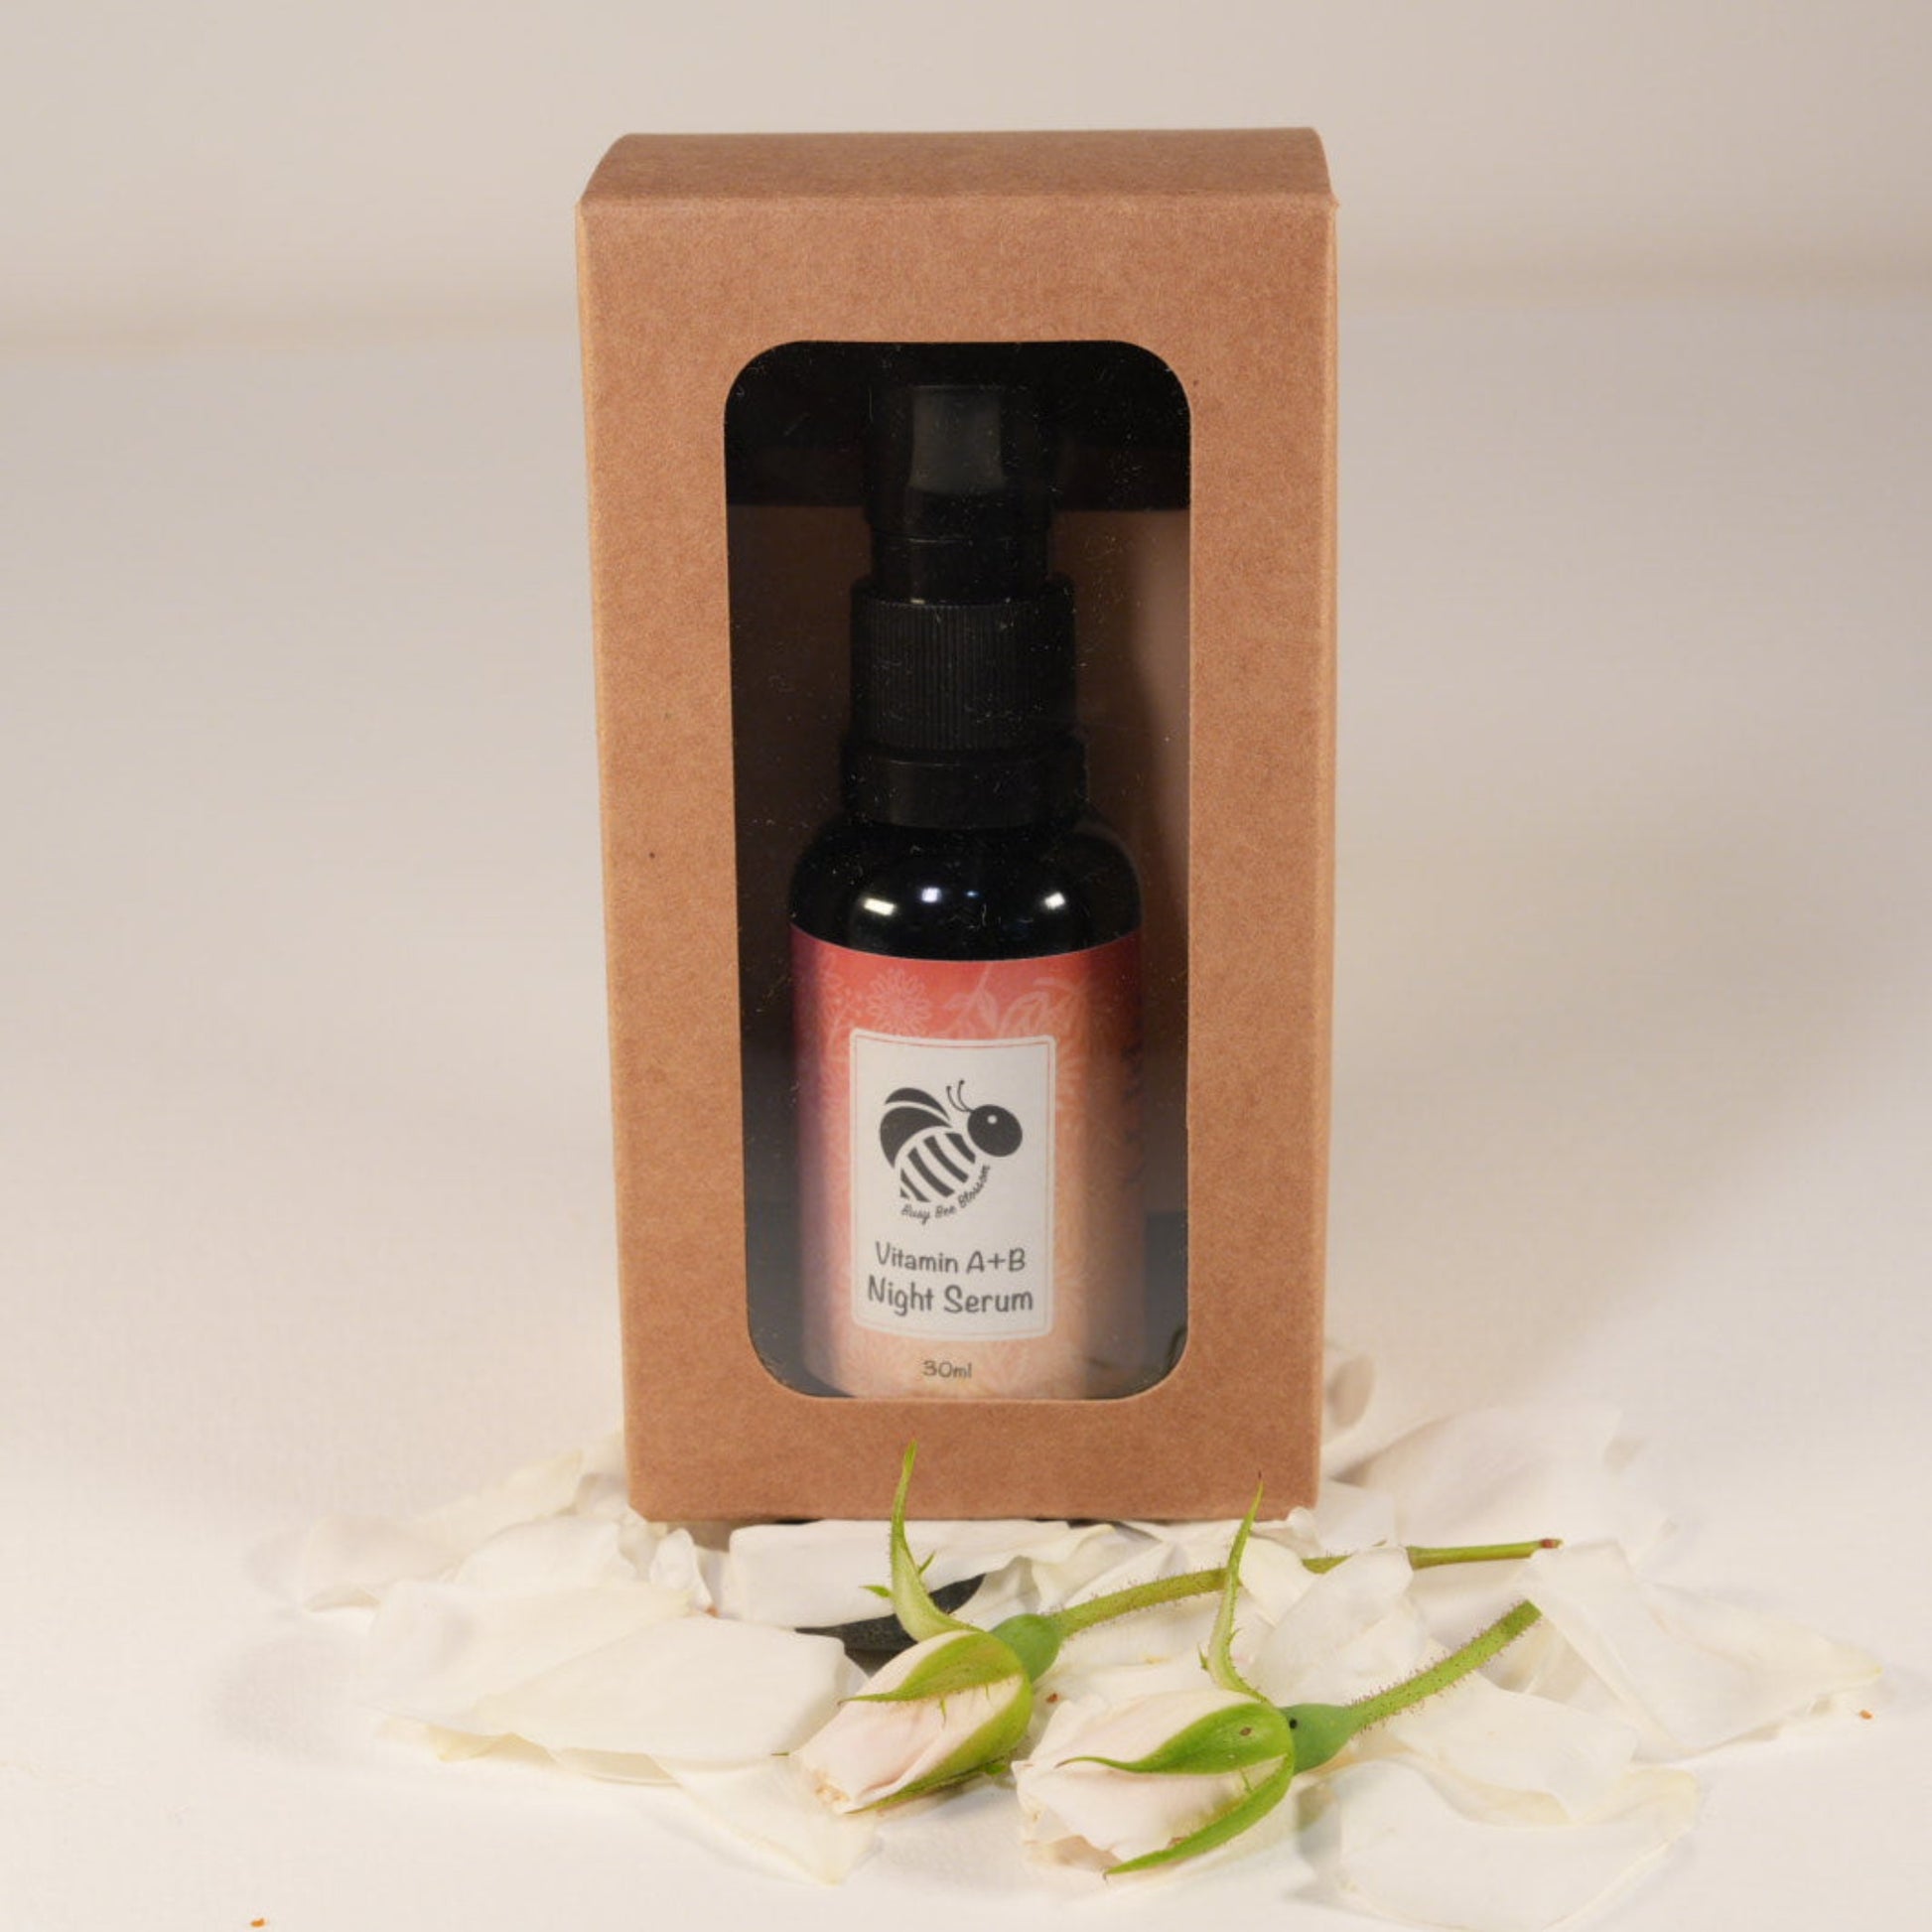 Vitamin A + B Night Serum in gift box with roses